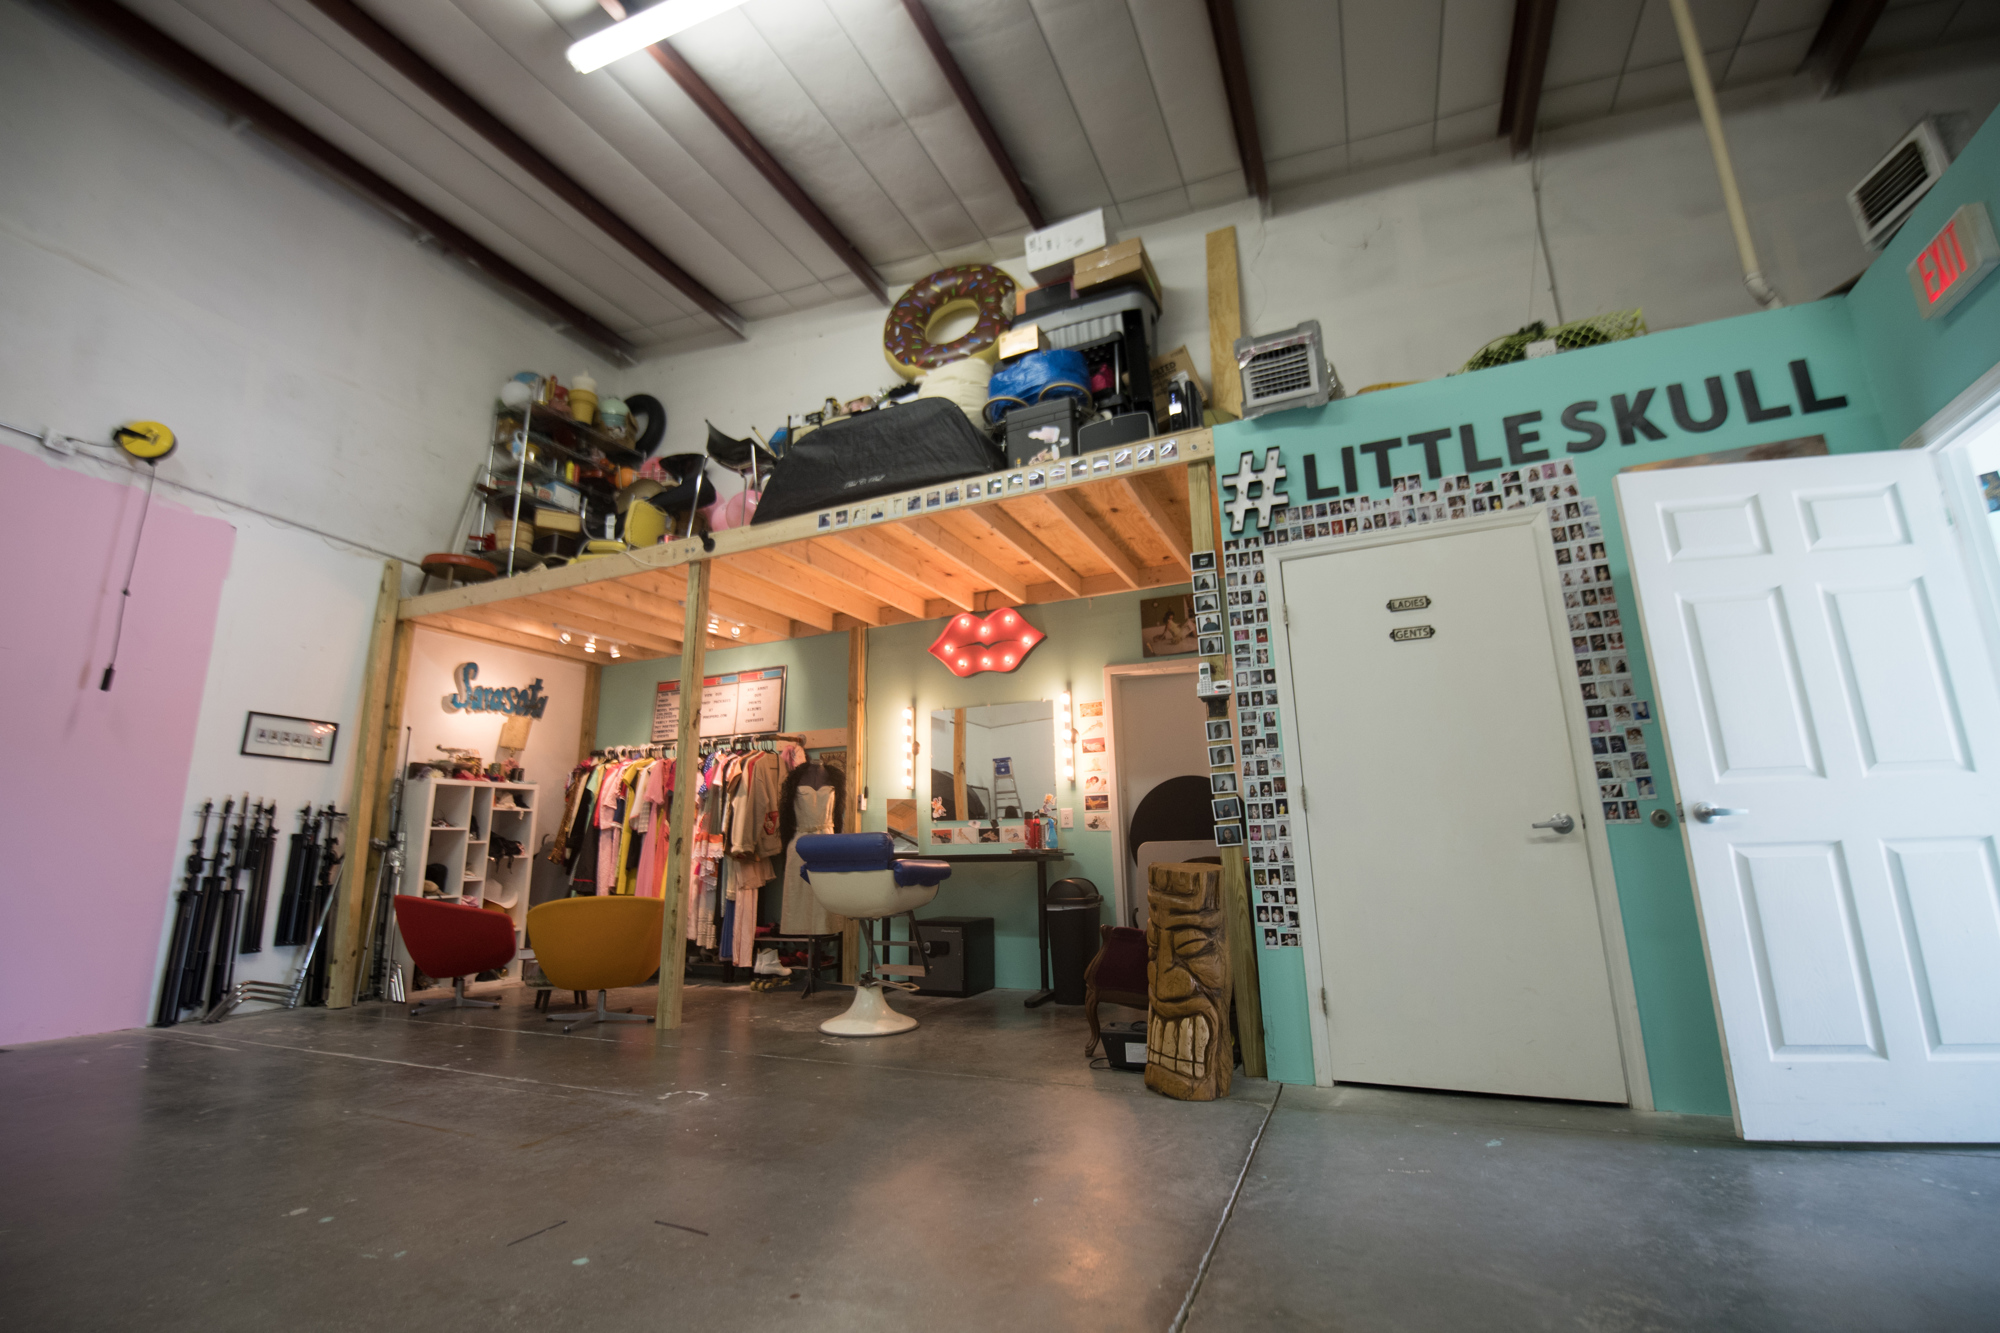 The studio and its dressing room area doubles as a showcase for the Devaneys’ extensive prop collection. Photo by Little Skull Photography.